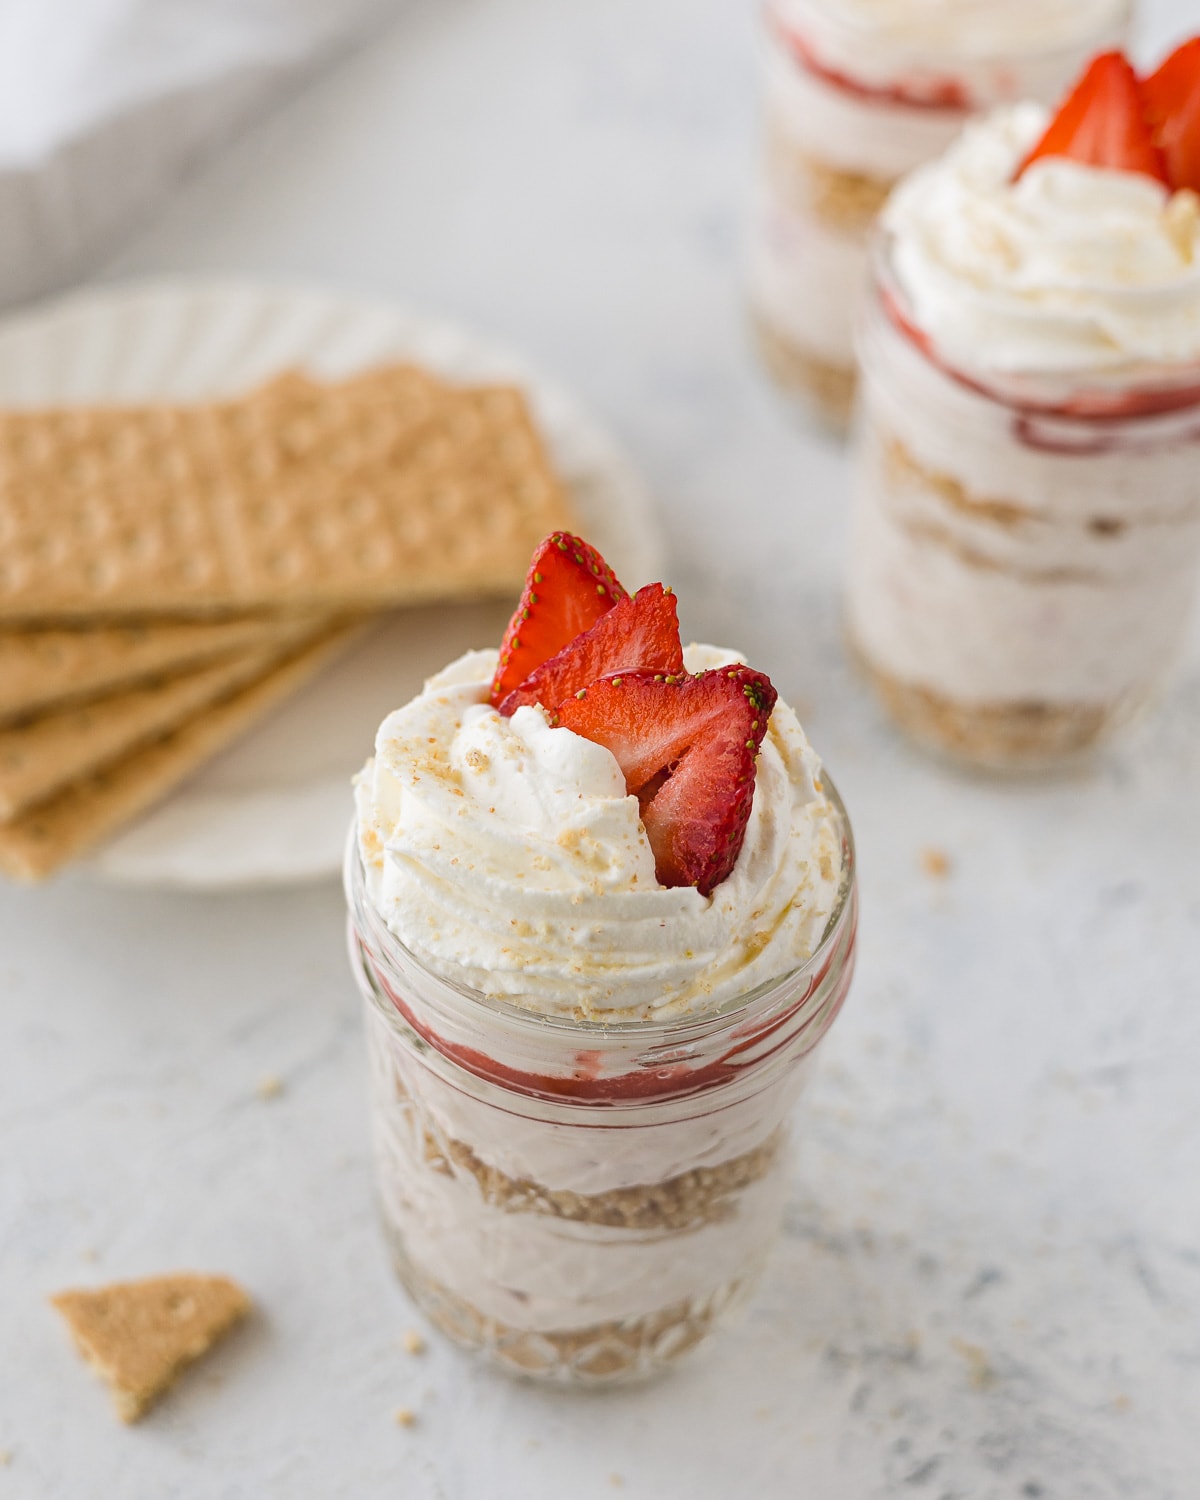 Layered no bake strawberry cheesecake in a mason jar topped with whipped cream and strawberries.